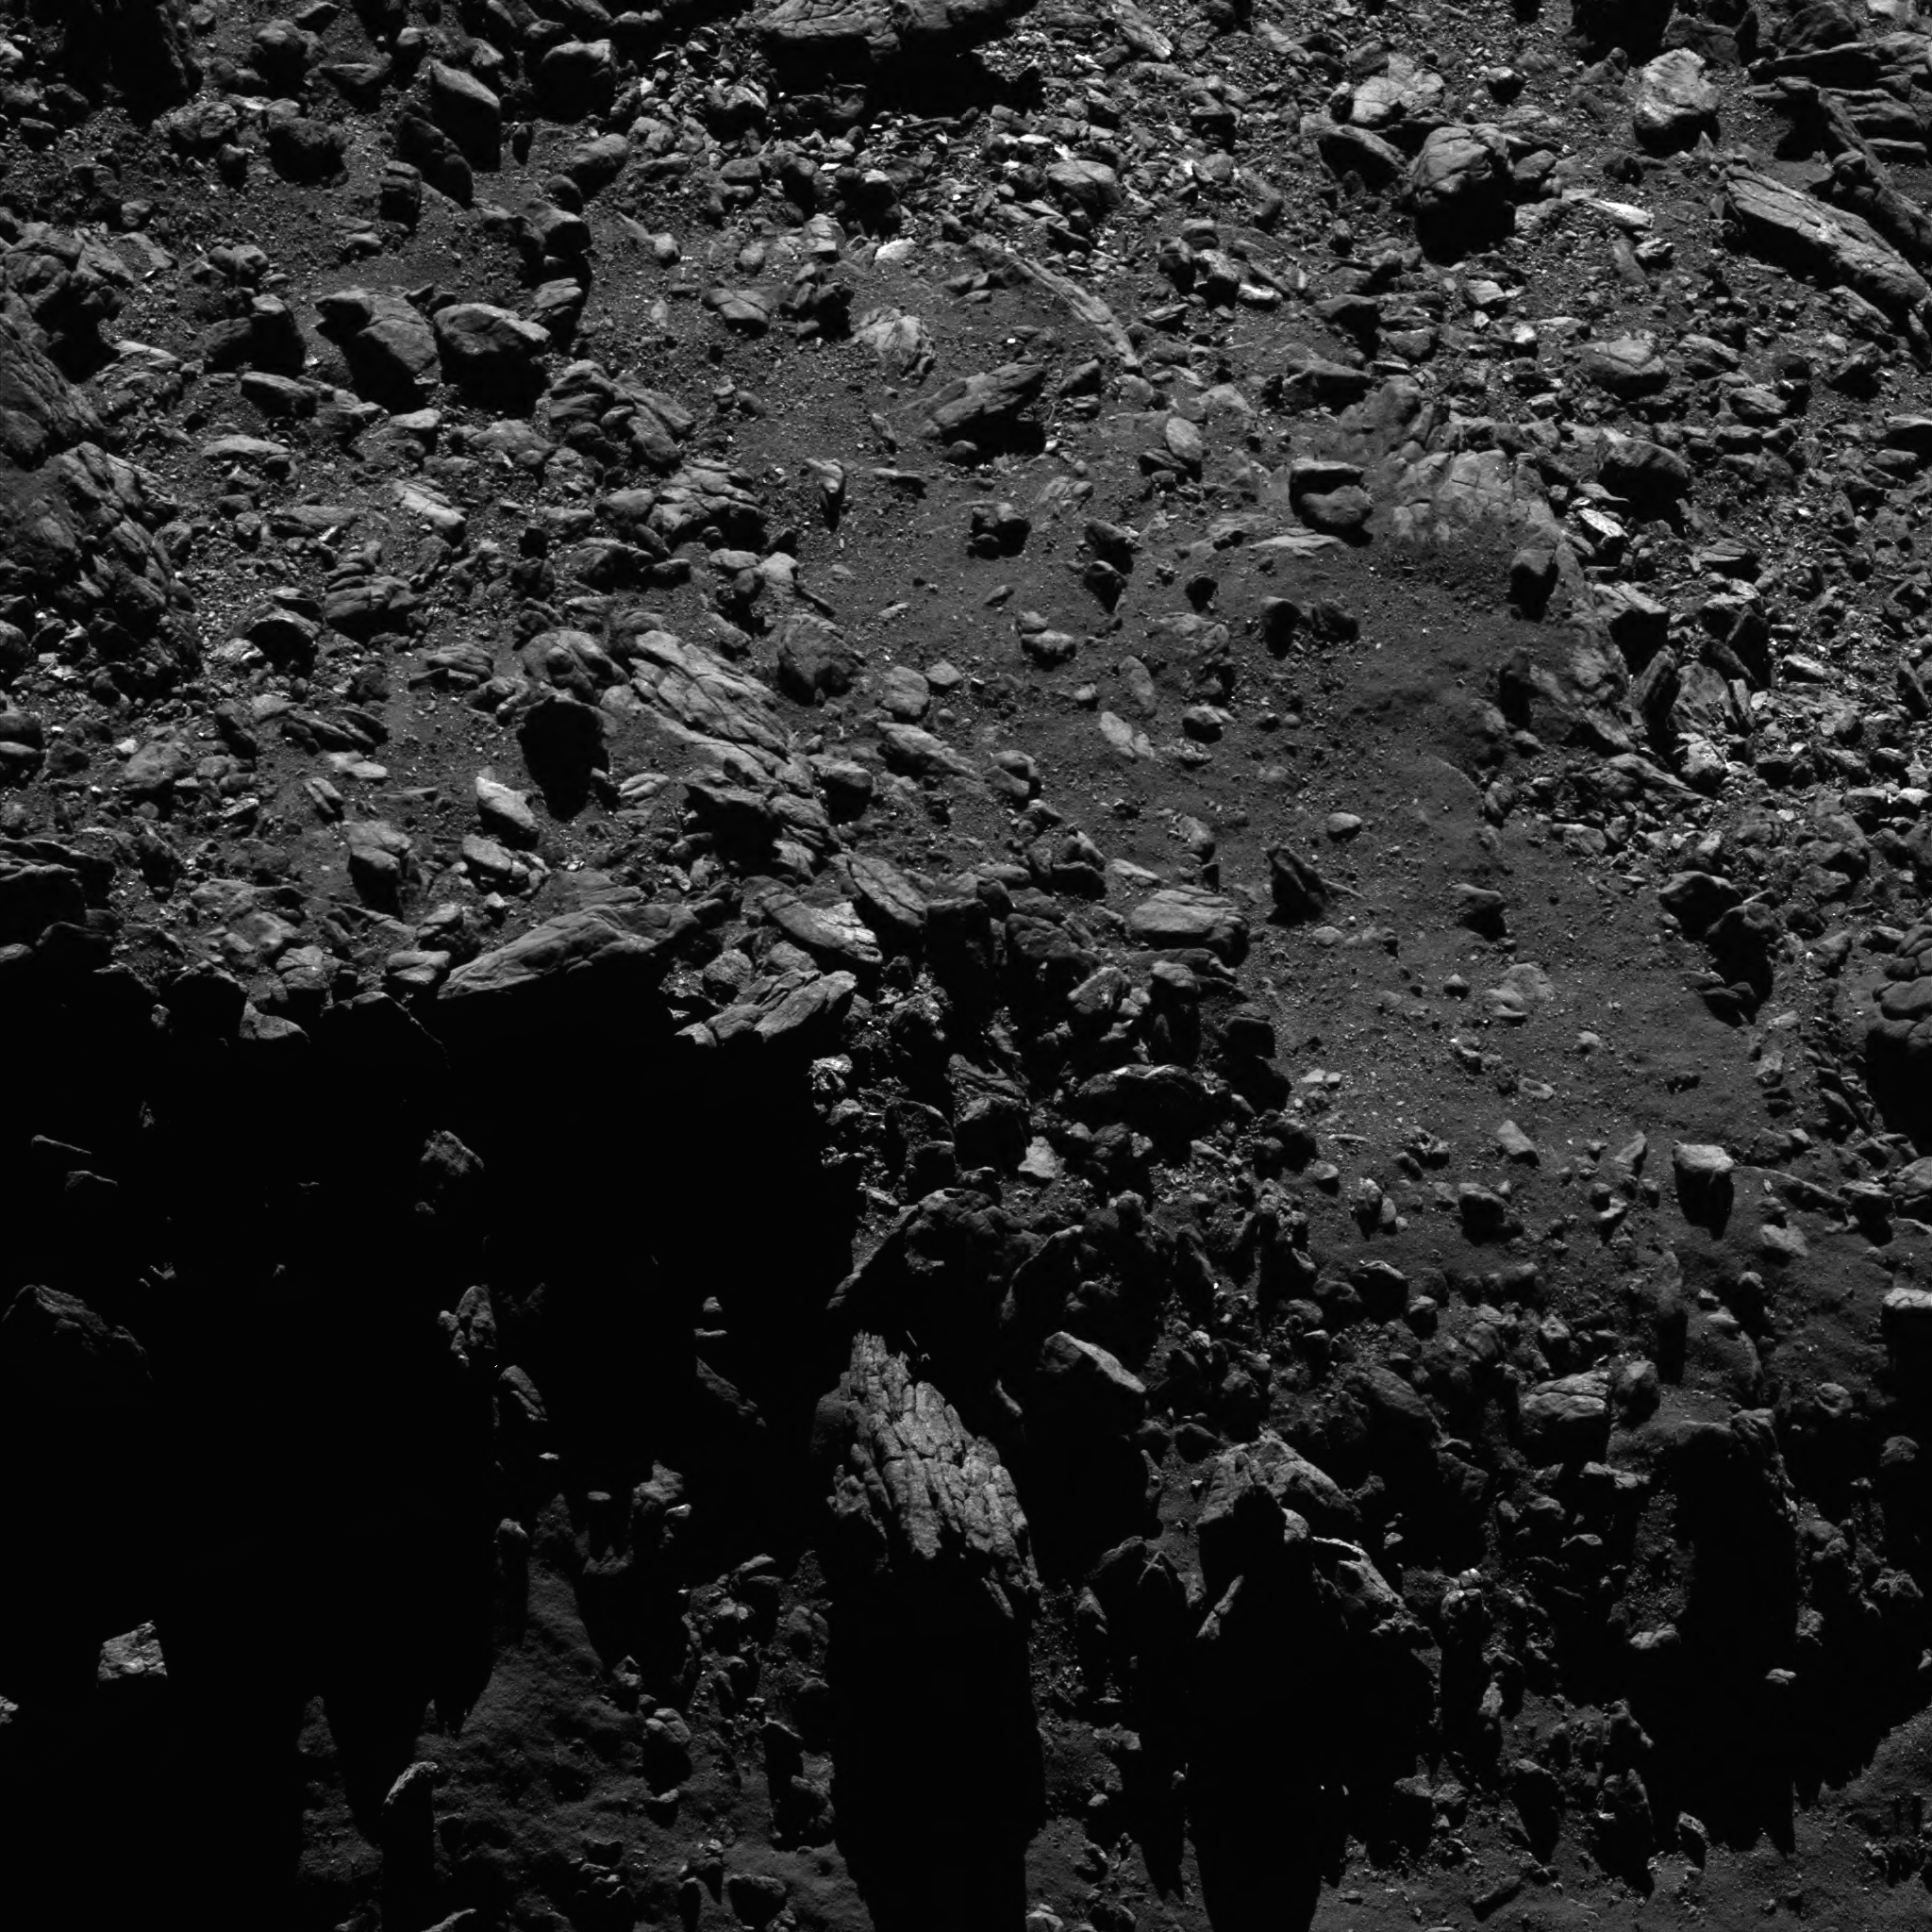 The Rosetta Image Archive Is Now Complete And Freely Available, So You Can See A Comet Like Never Before